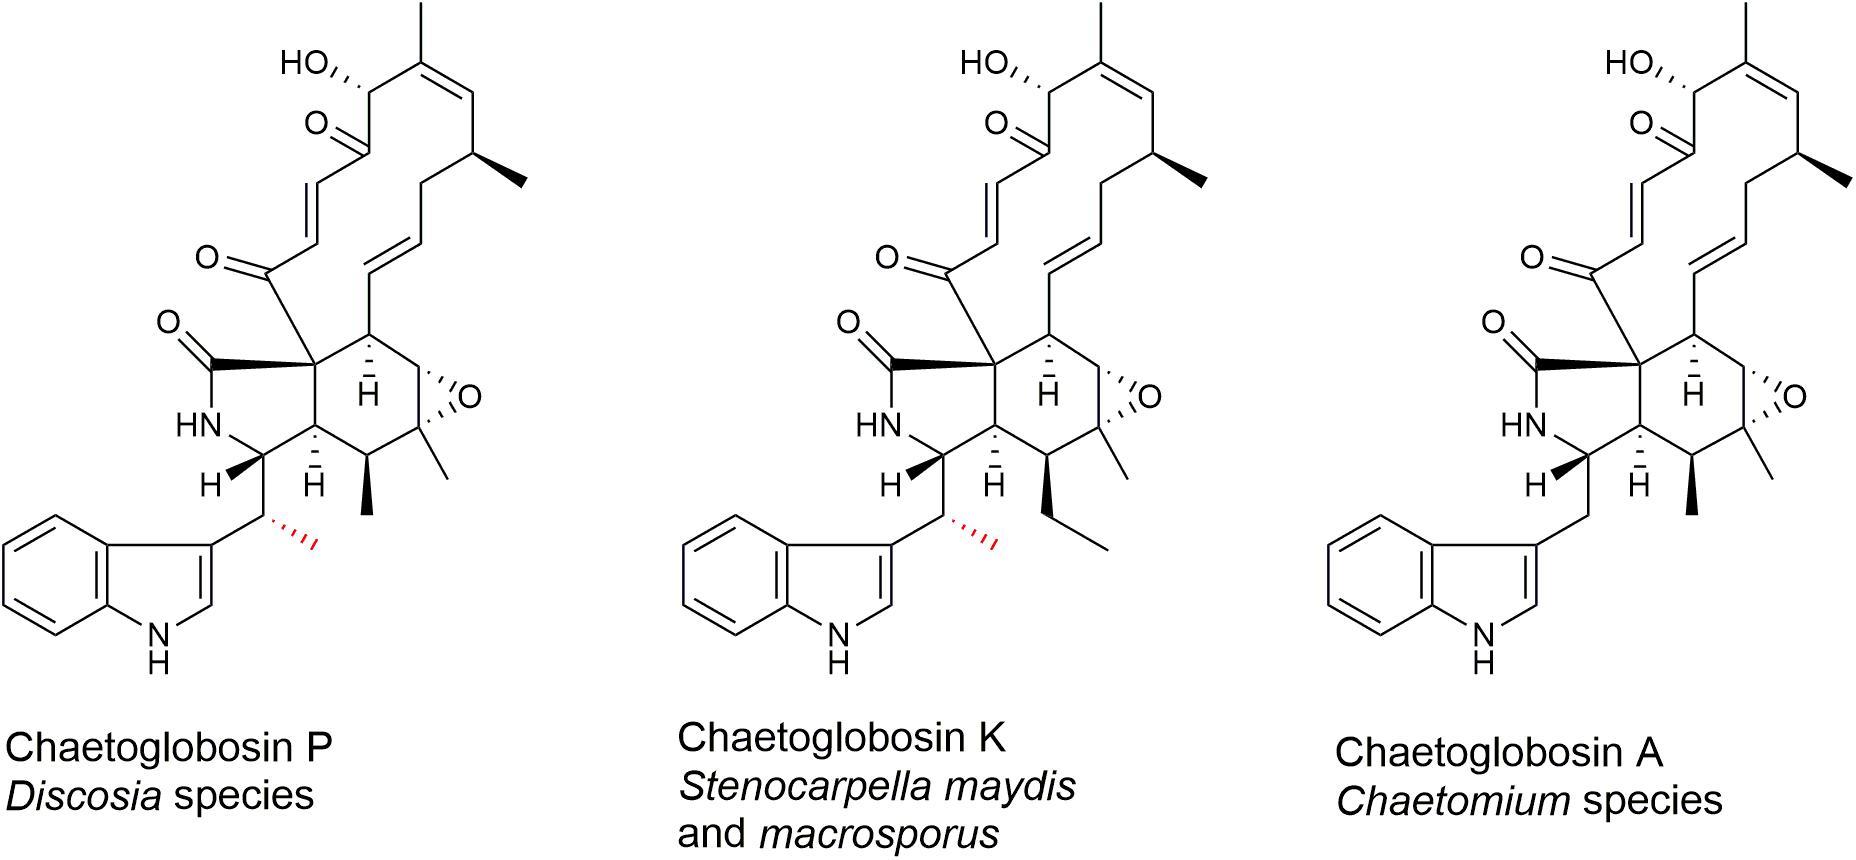 Frontiers Identification of the Antifungal Metabolite Chaetoglobosin P From Discosia rubi Using a Cryptococcus neoformans Inhibition Assay Insights Into Mode of Action and Biosynthesis pic